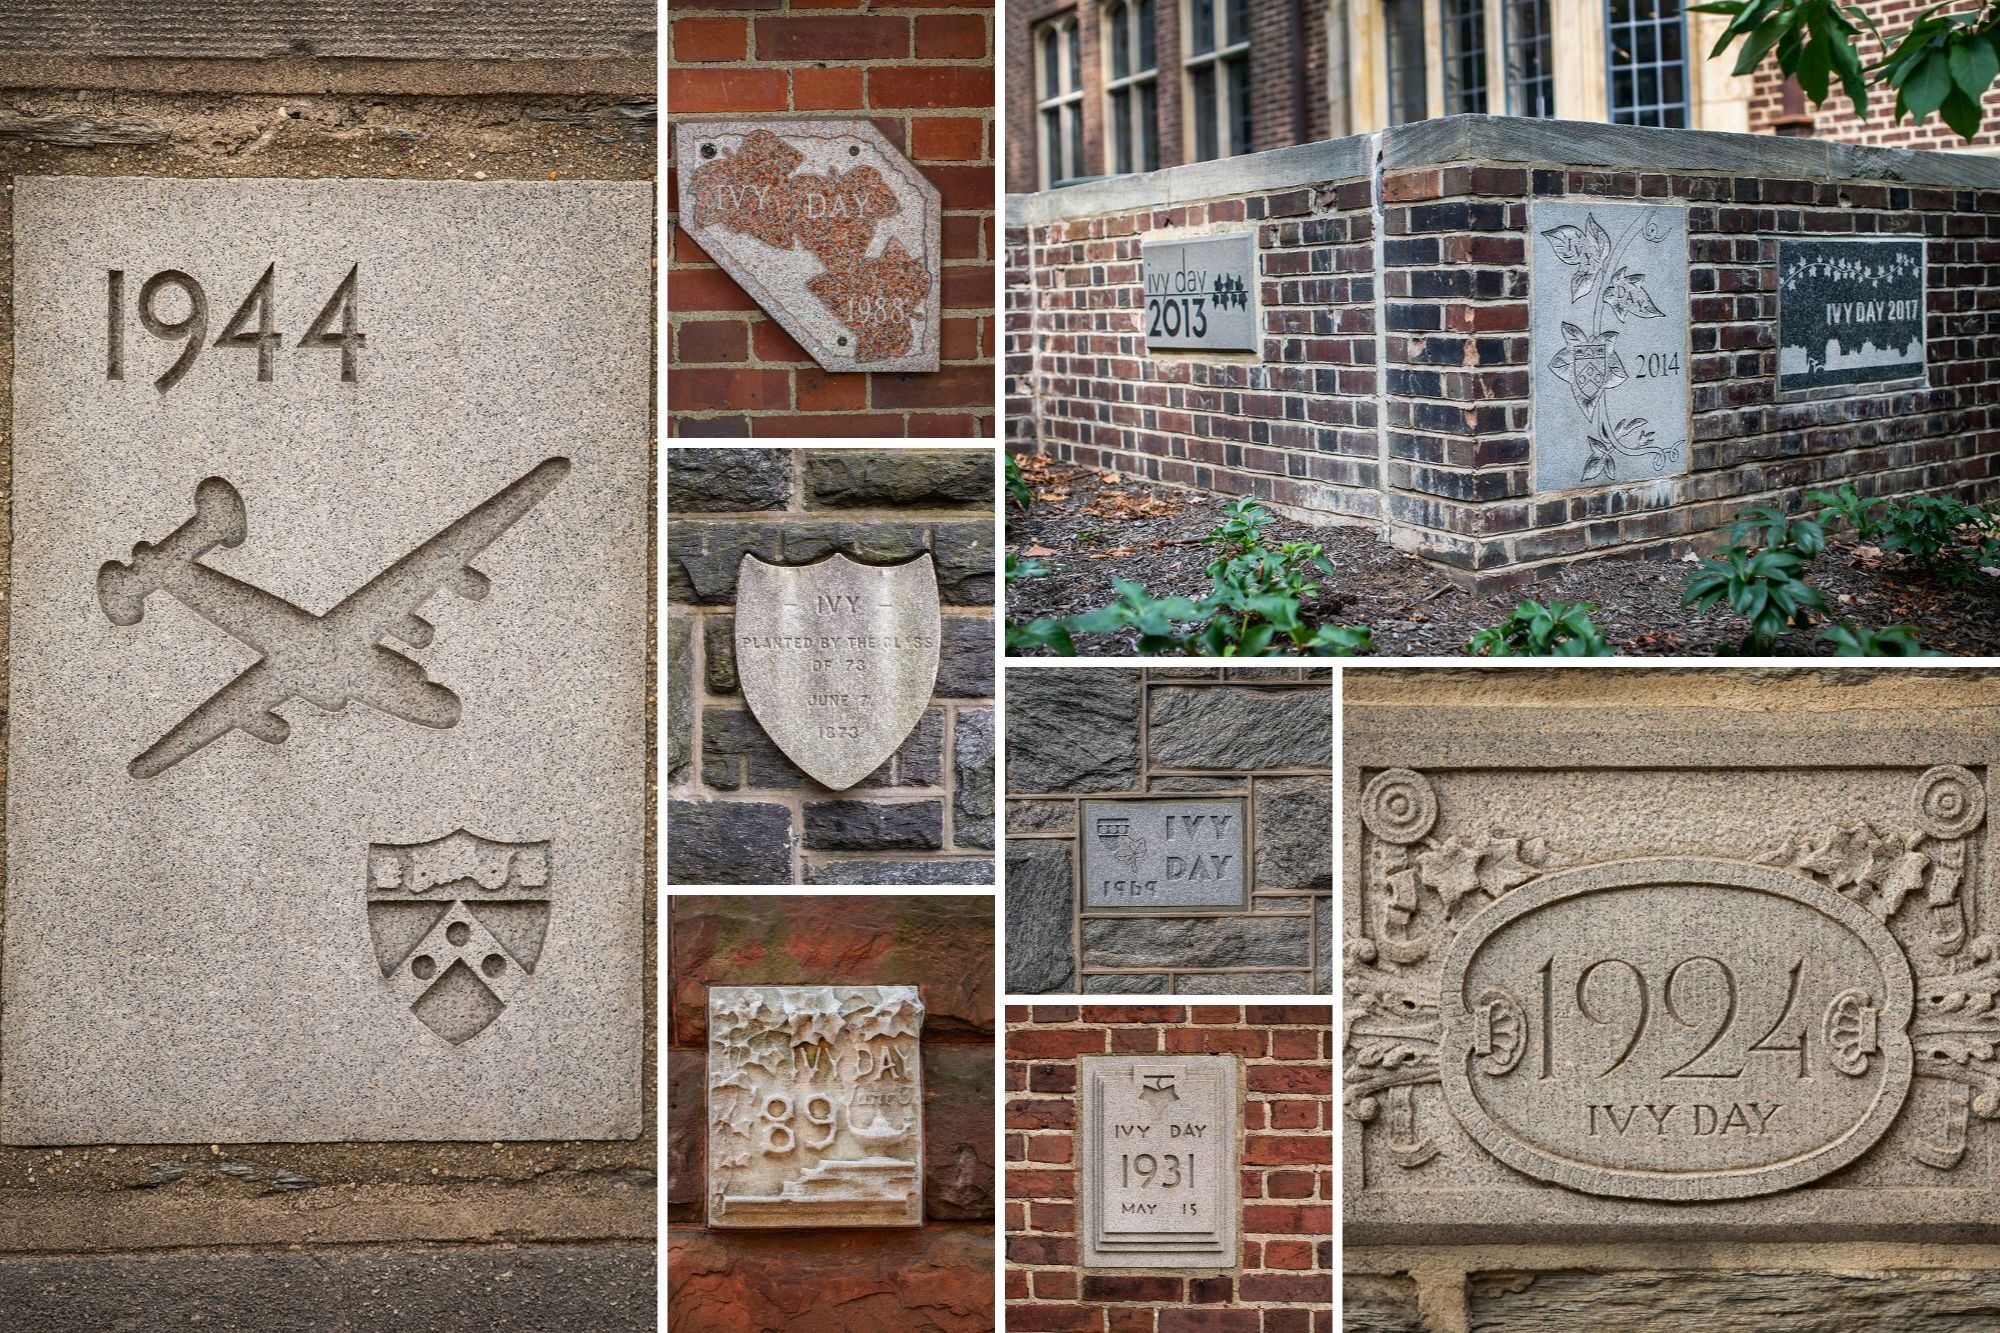 A composite of different photos showing Ivy Stones on Penn's campus from various years.